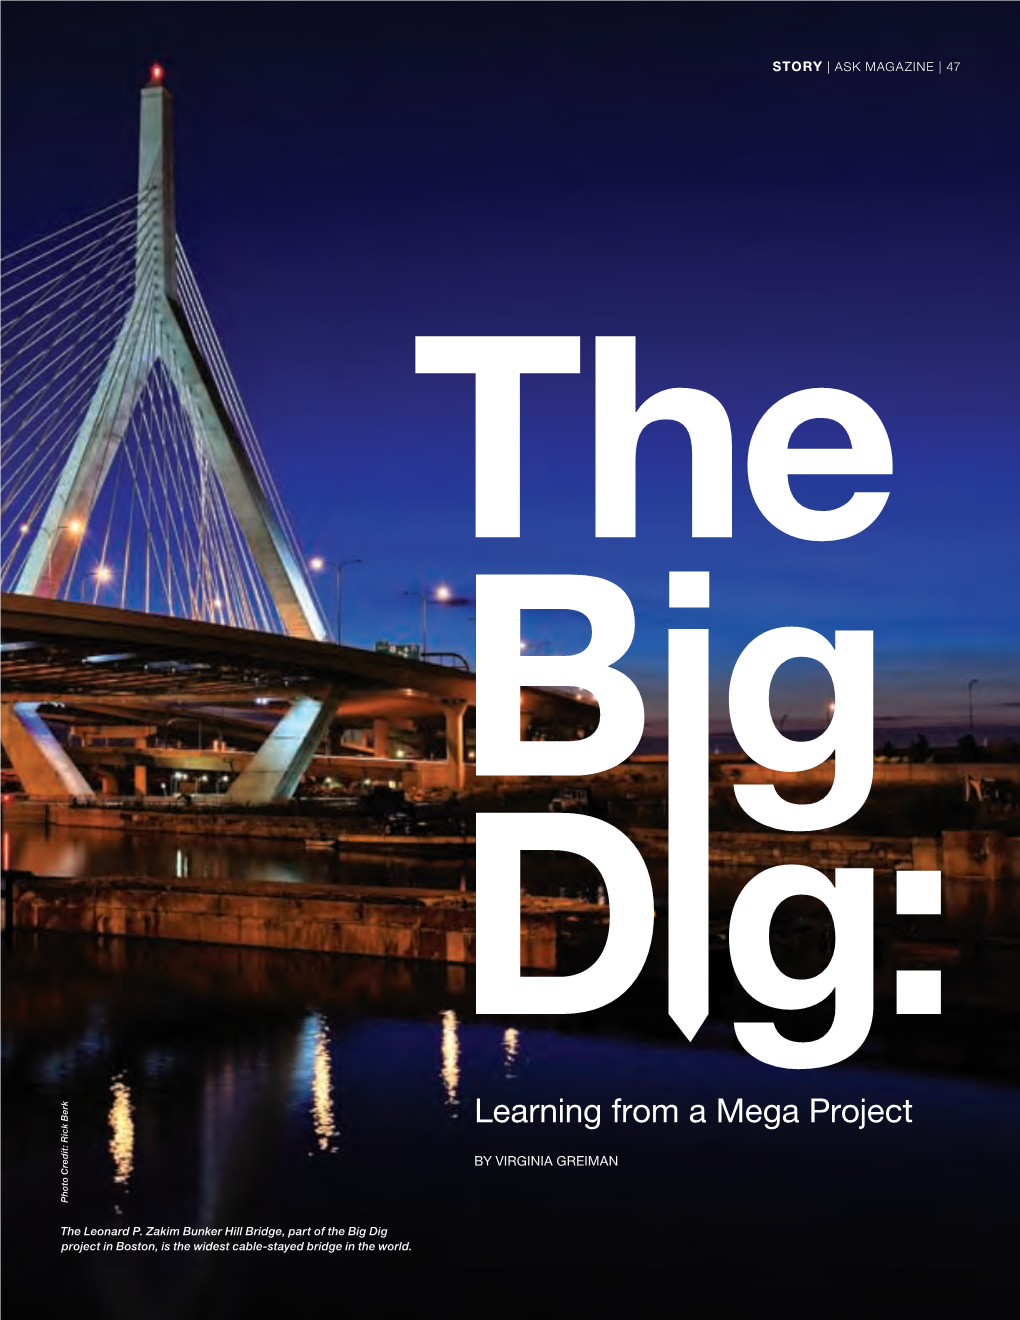 The Big Dig Project in Boston, Is the Widest Cable-Stayed Bridge in the World